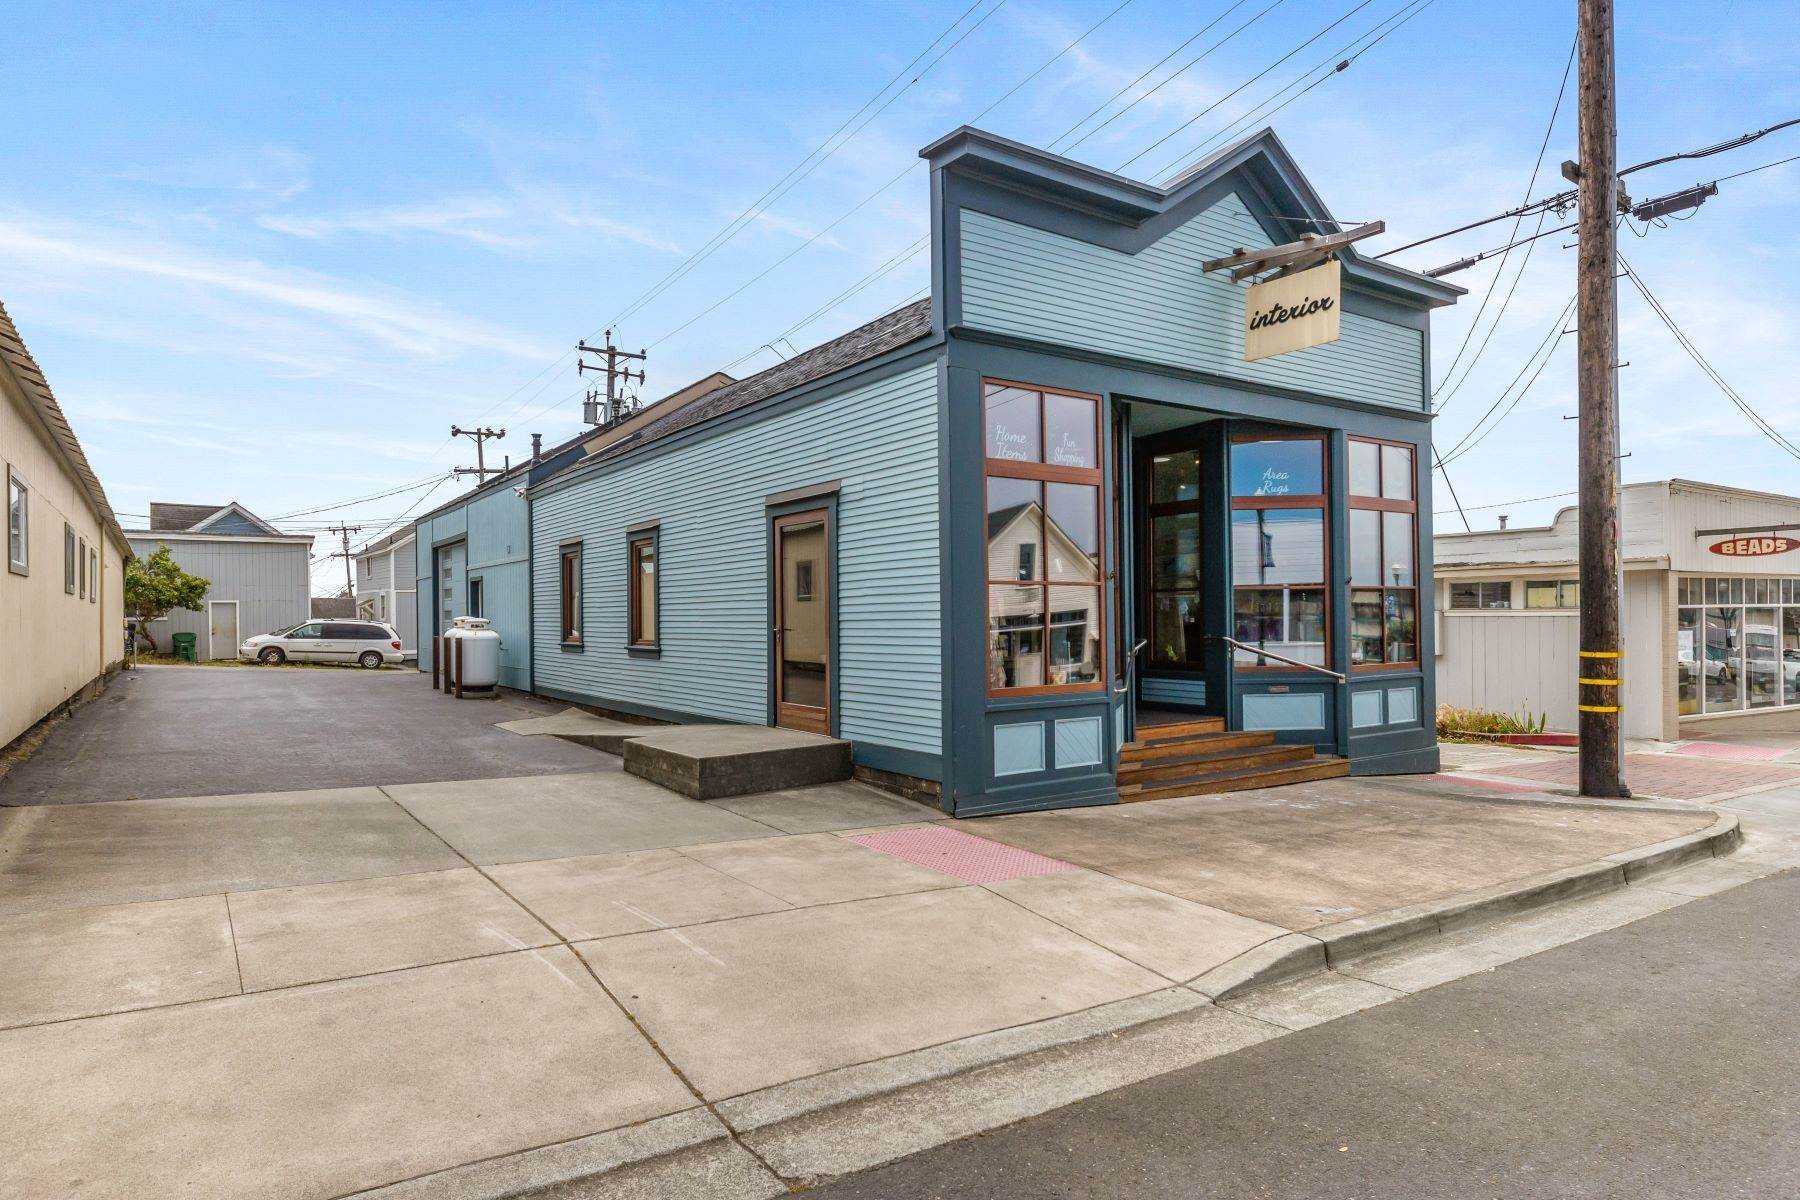 2. Property for Sale at Interior's Retail Building 224 E Redwood Fort Bragg, California 95437 United States